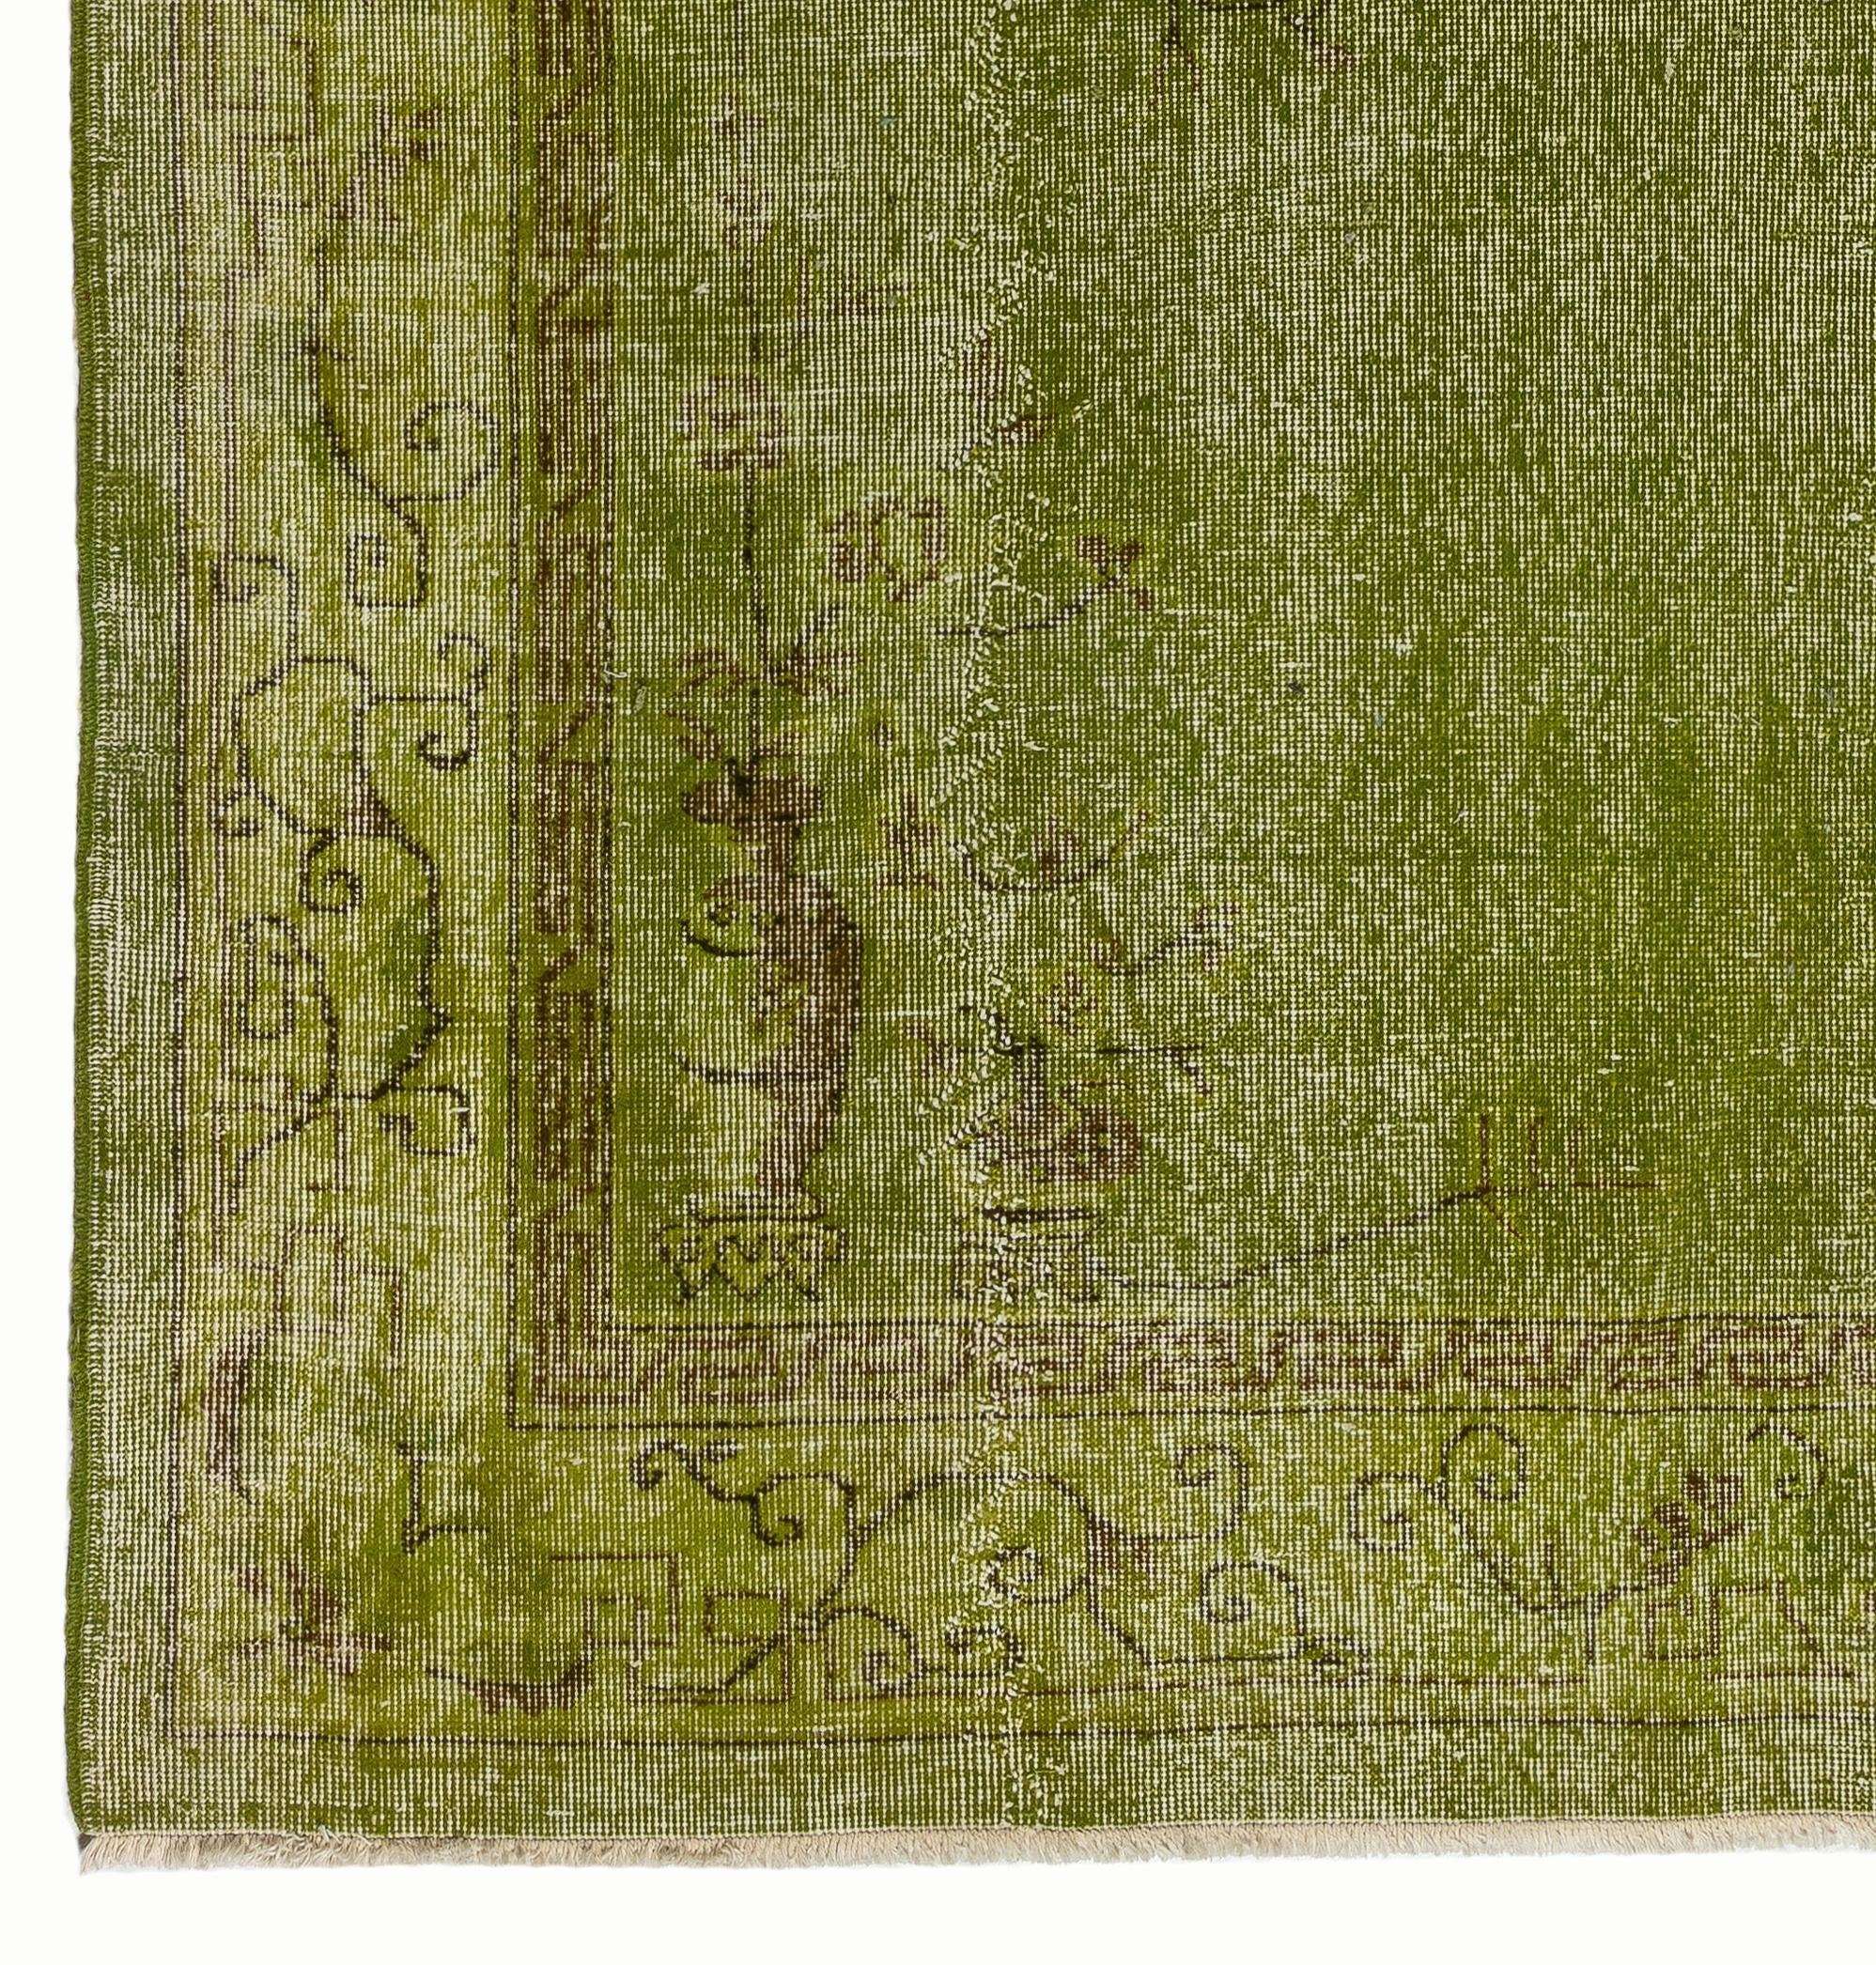 Hand-Woven 7.4x10.7 Ft  Vintage Handmade Rug Re-dyed in Chartreuse, Art Deco Chinese Design